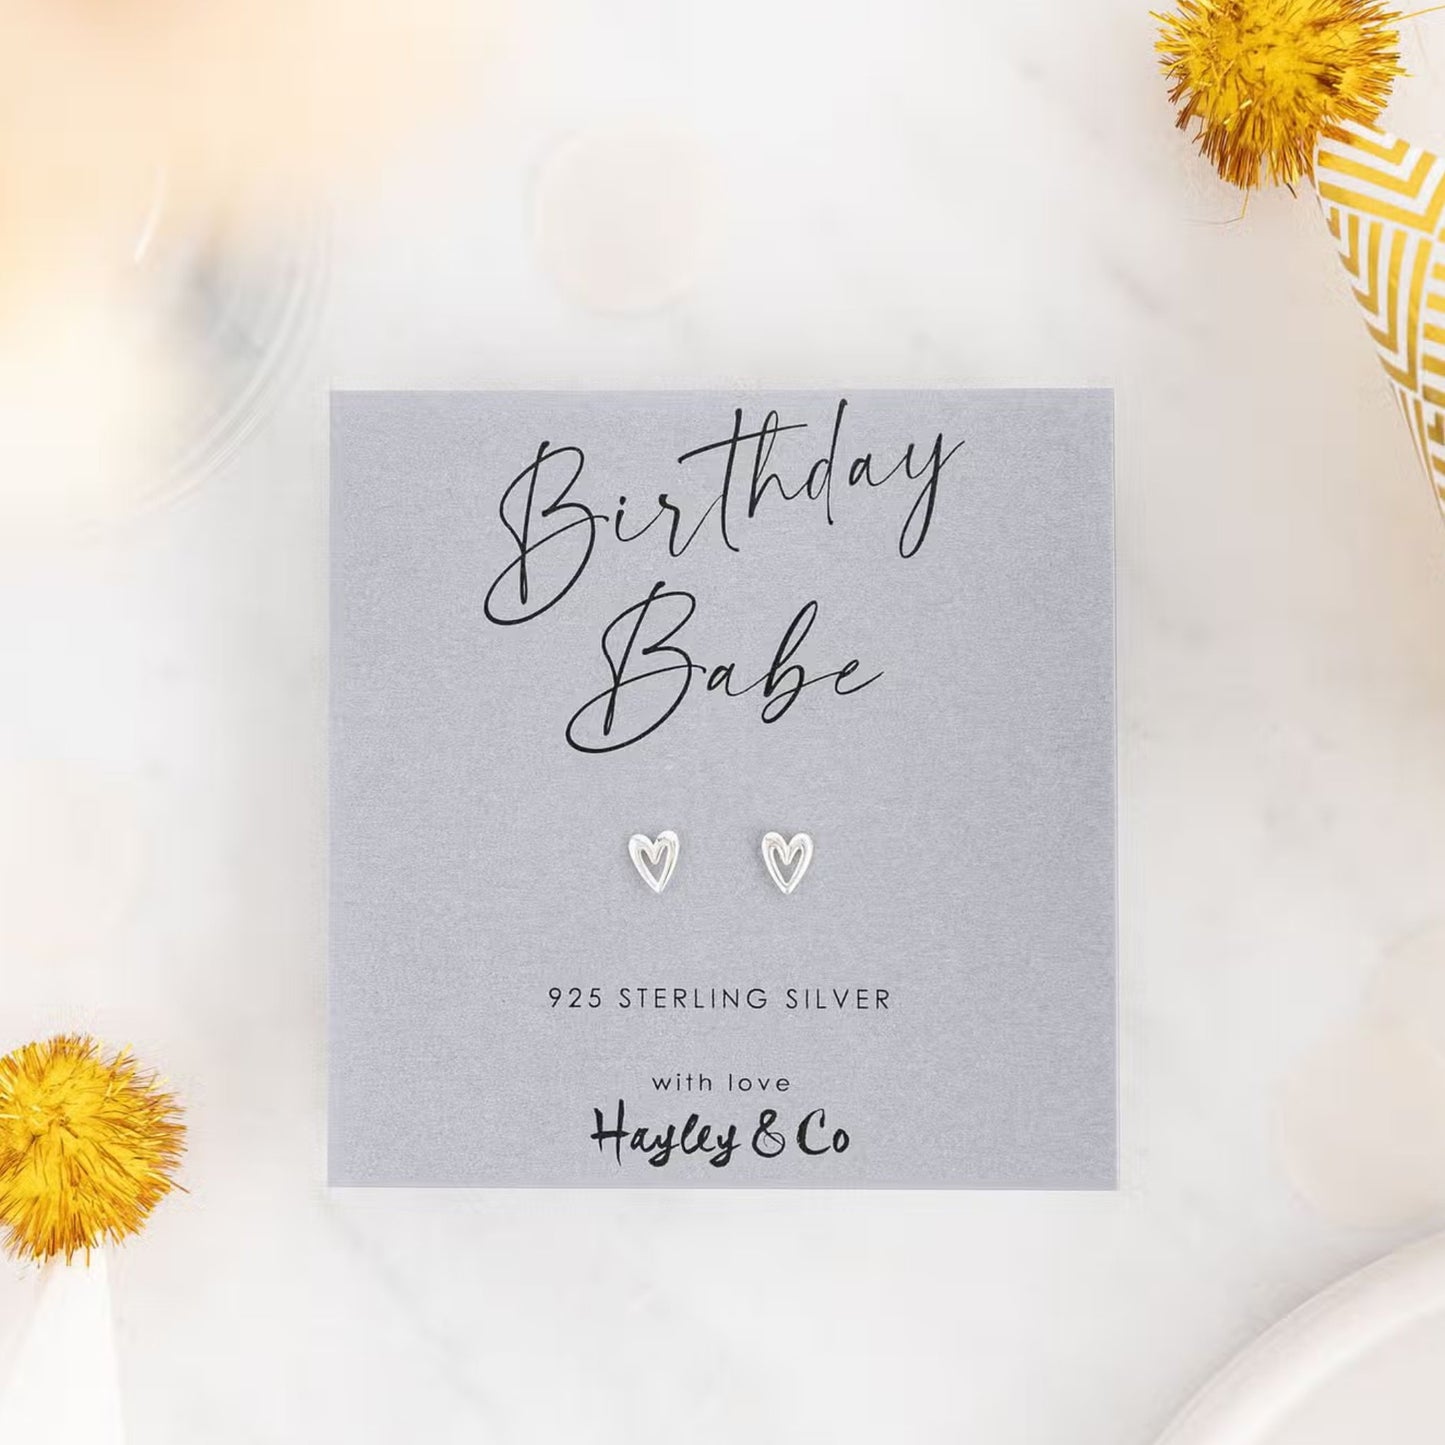 Birthday Babe Sterling Silver Earrings - The Little Jewellery Company